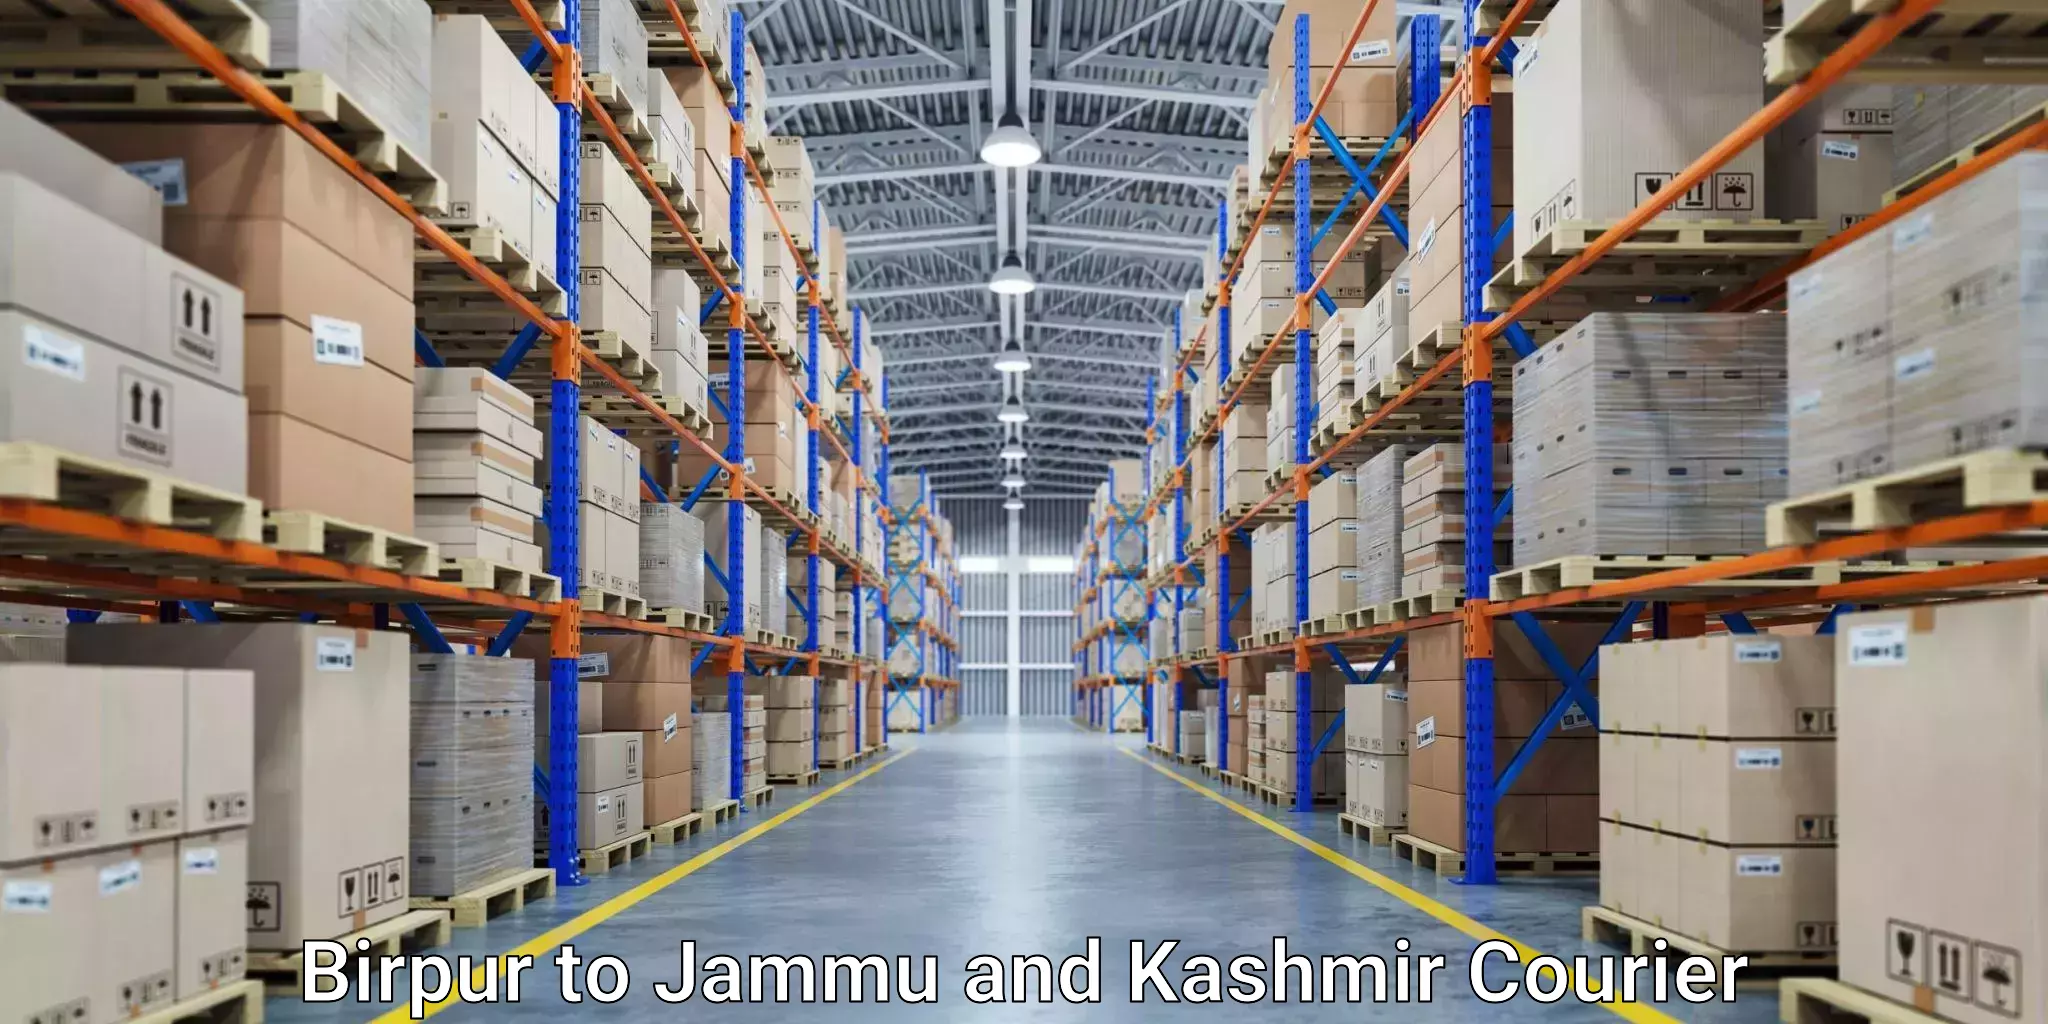 Sustainable shipping practices Birpur to Jammu and Kashmir